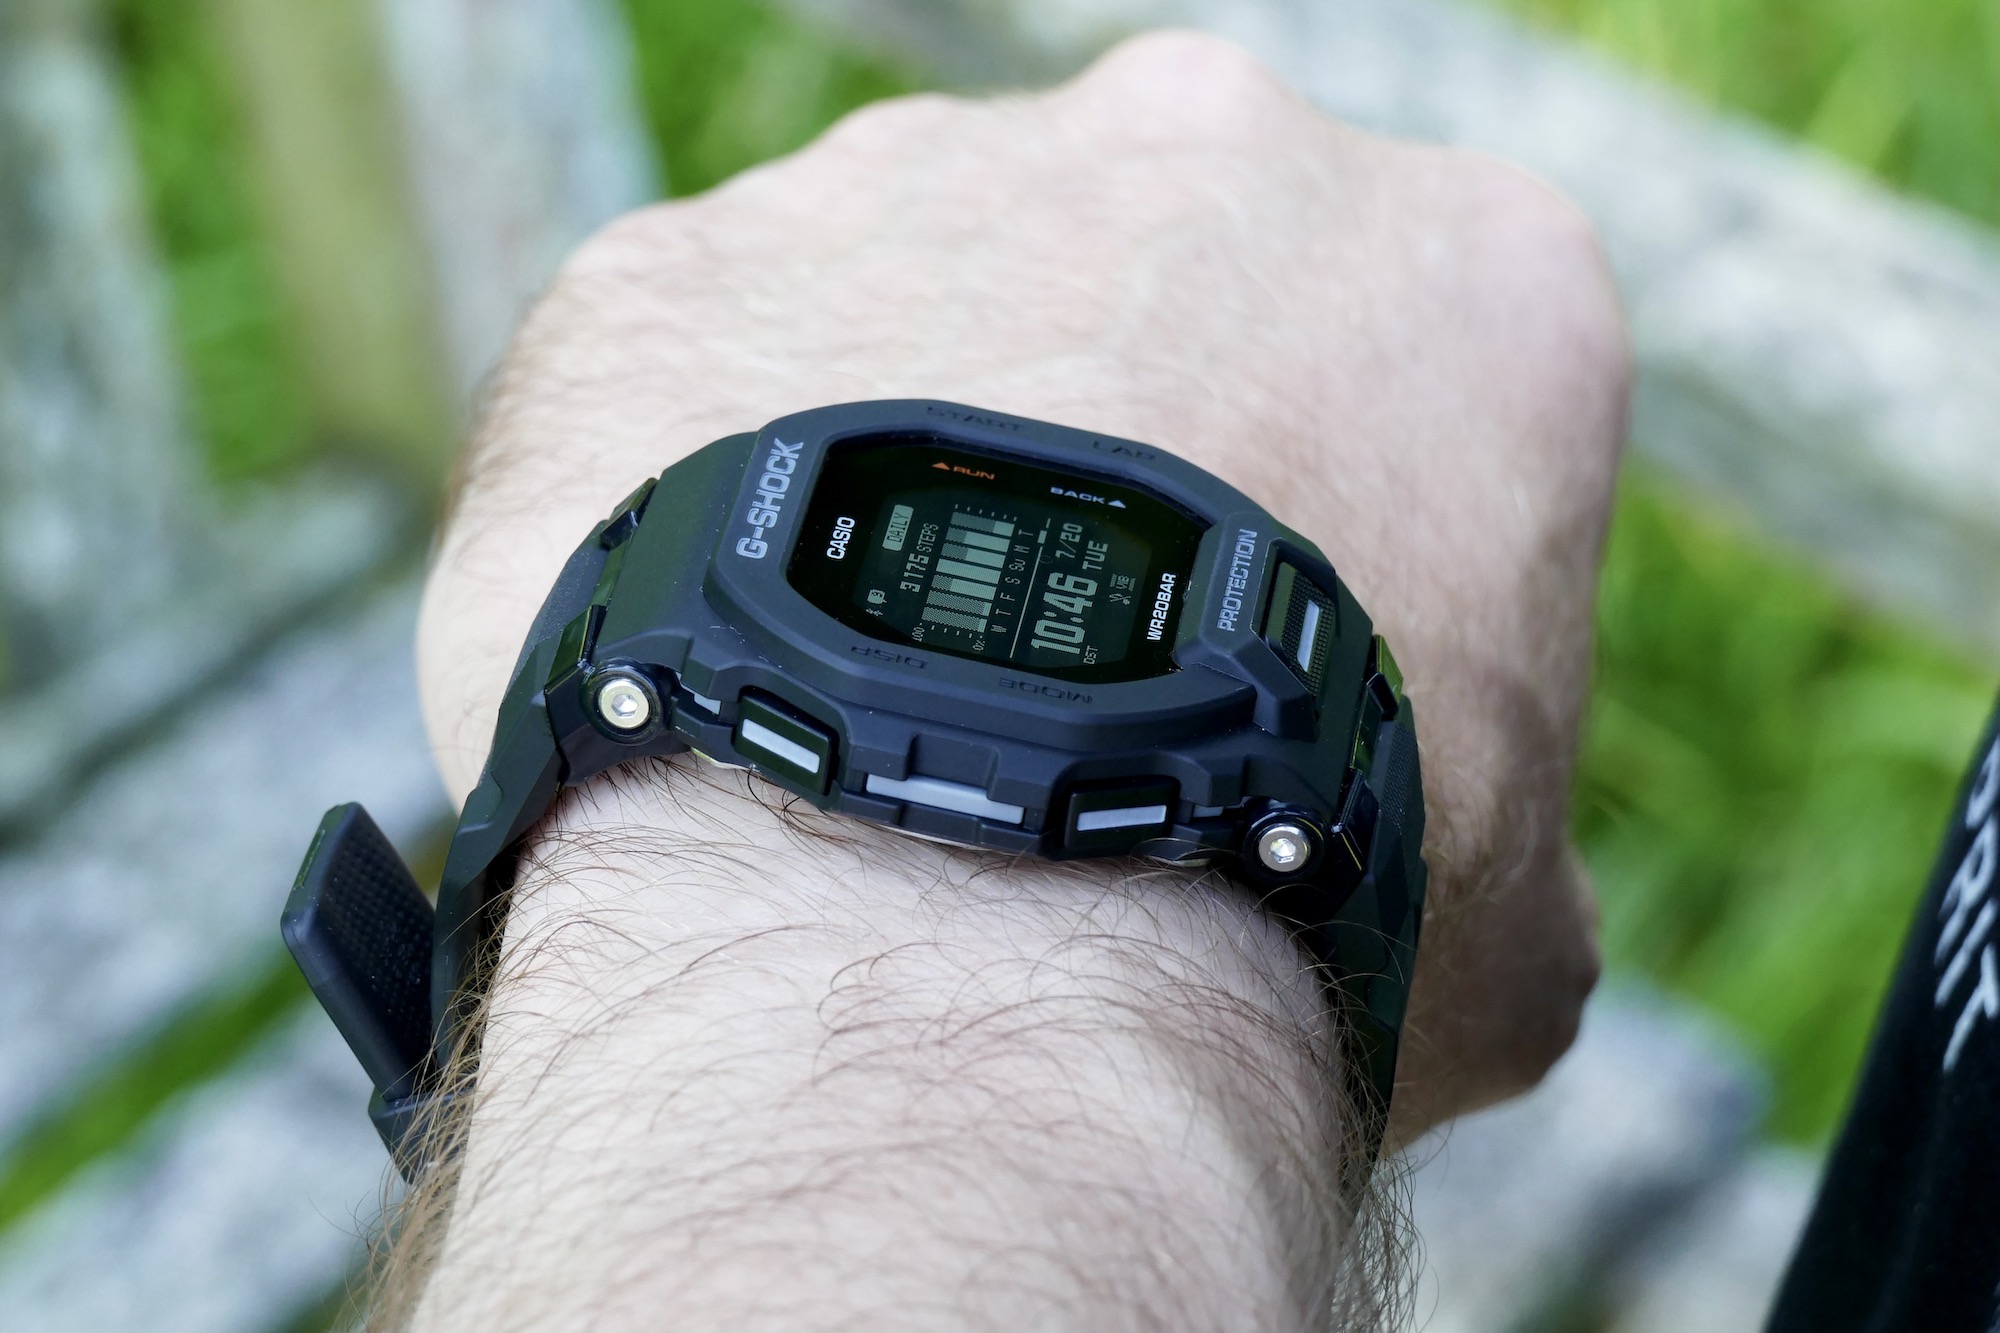 Casio G-Shock GBD-200 Digital Perfectly | Balanced Review: Trends